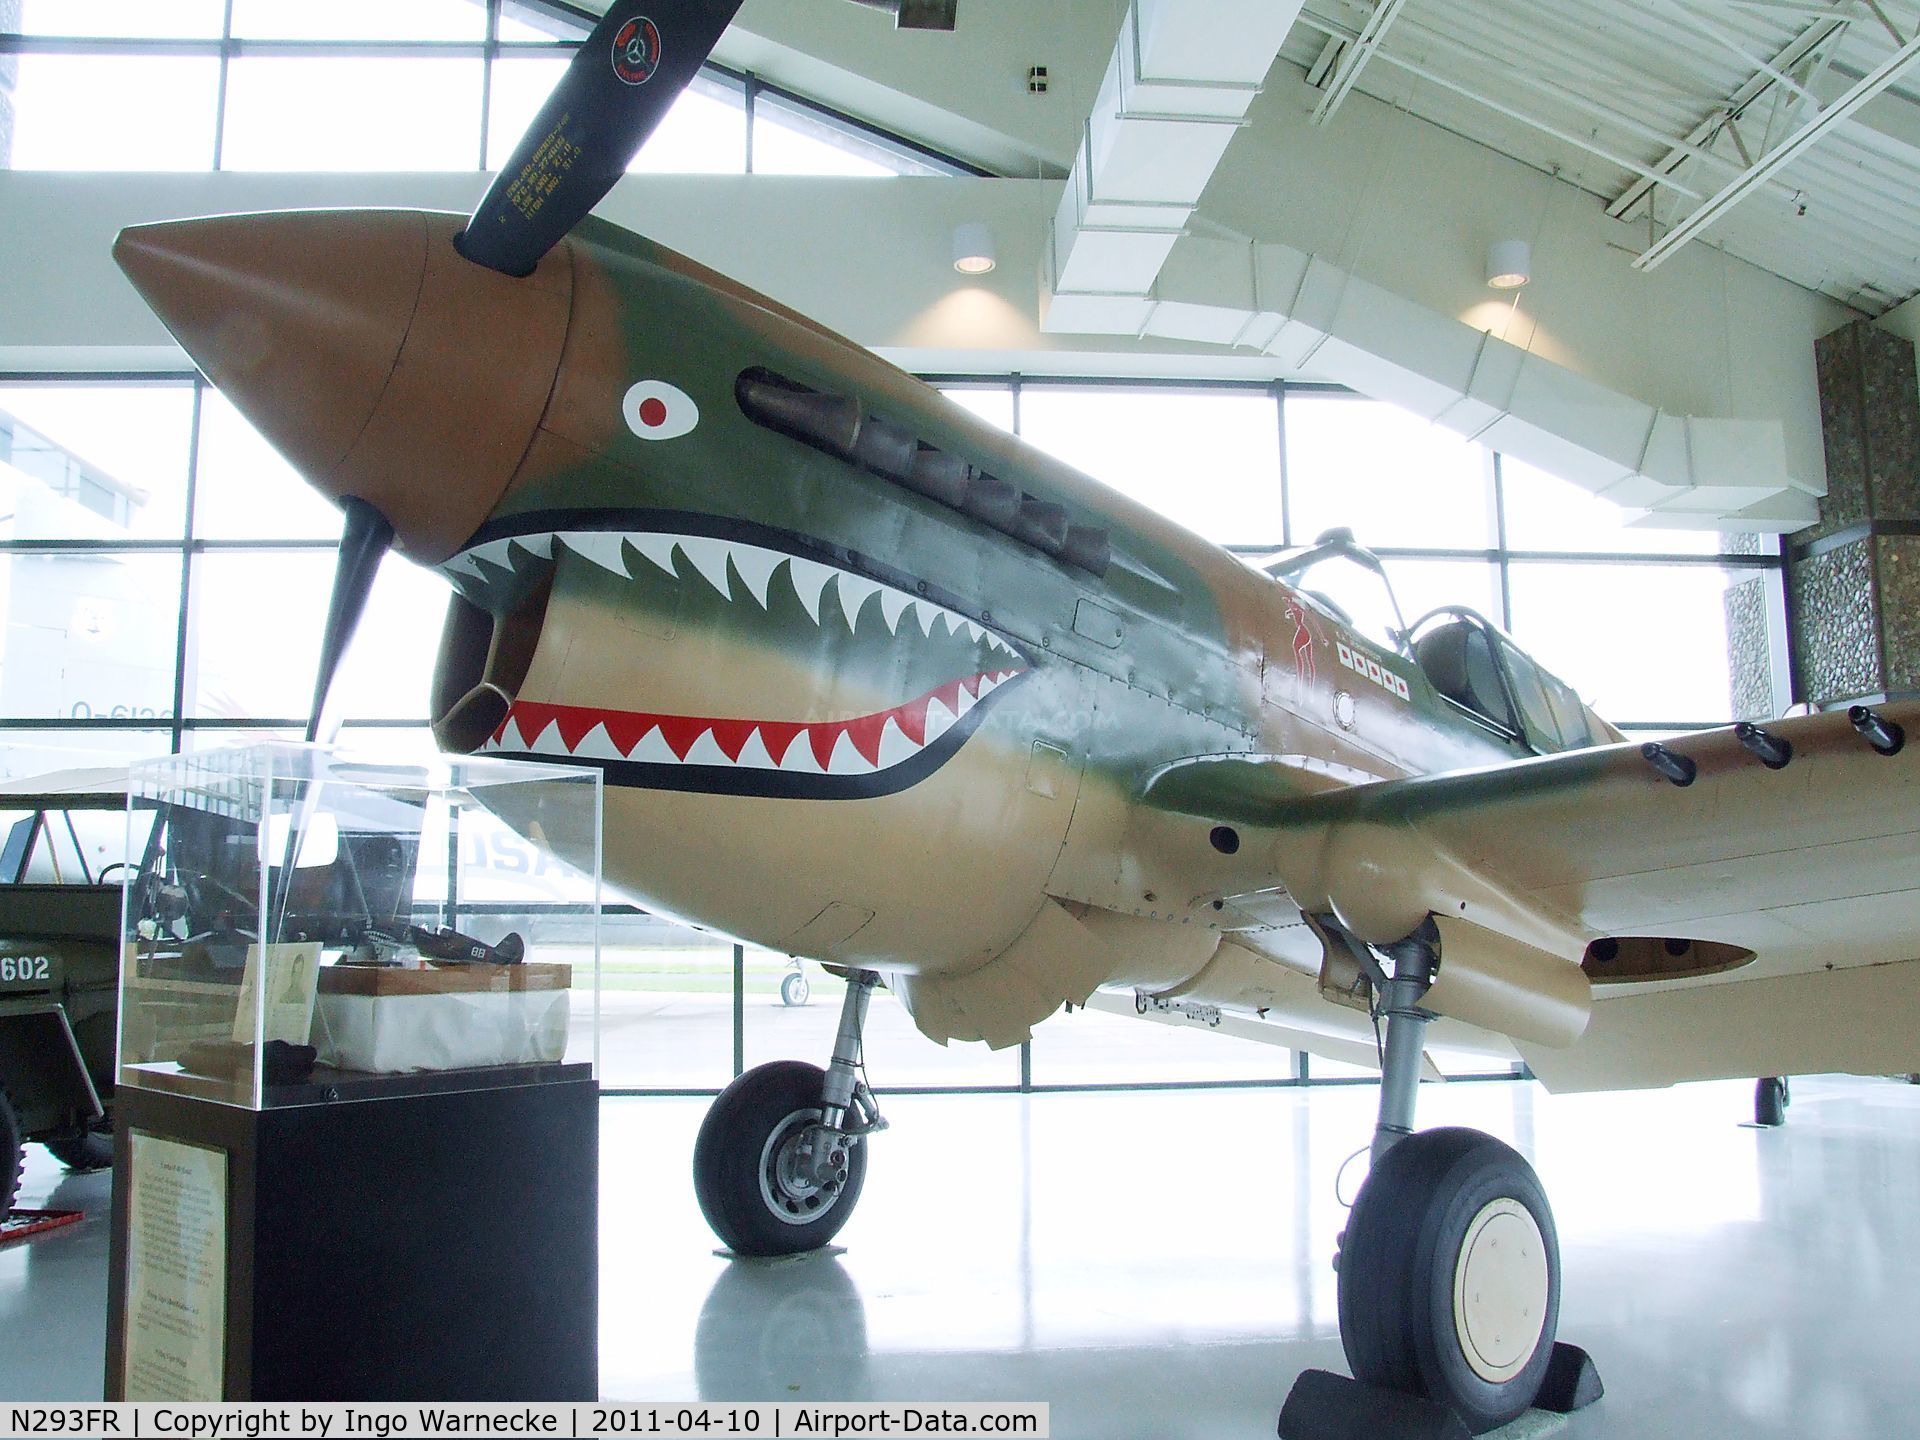 N293FR, 1944 Curtiss P-40K Warhawk C/N 2133, Curtiss P-40K Kittyhawk at the Evergreen Aviation & Space Museum, McMinnville OR